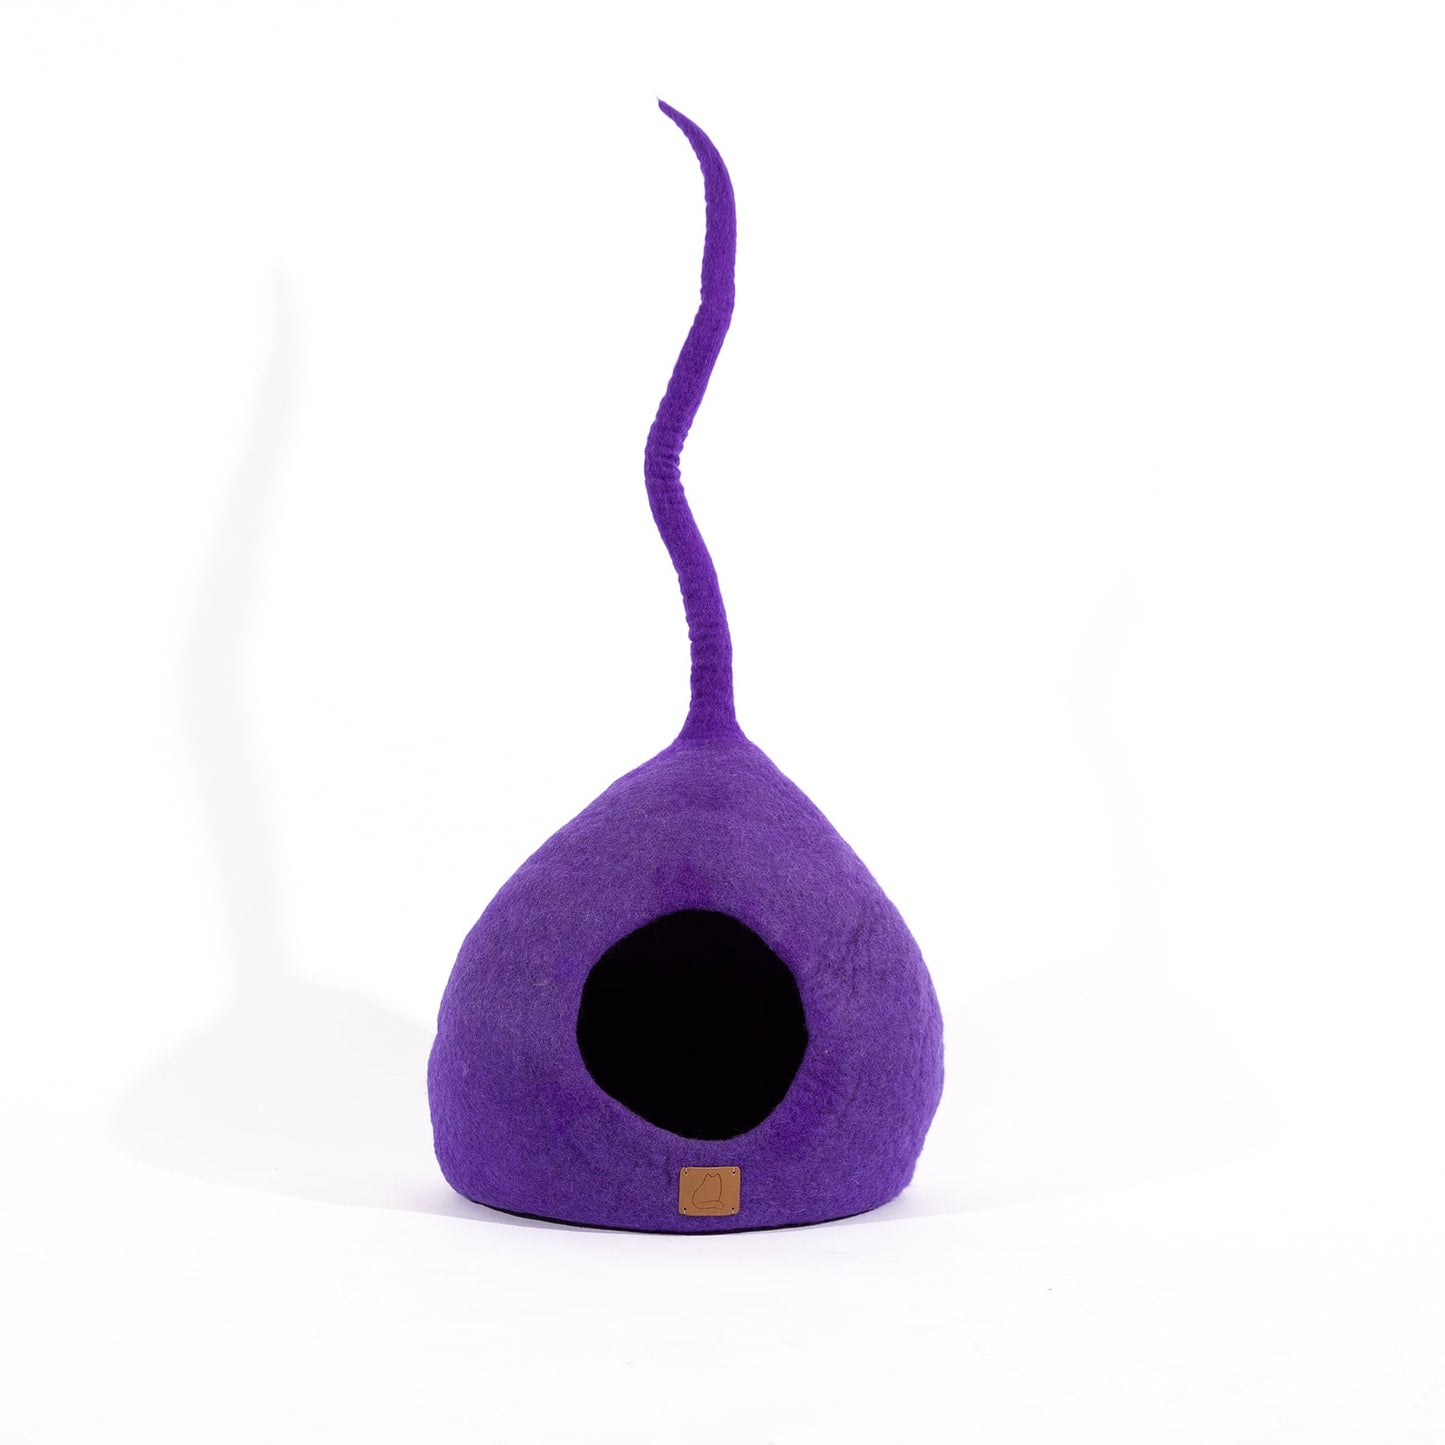 Deluxe Handcrafted Felt Cat Cave With Tail - Plum Purple